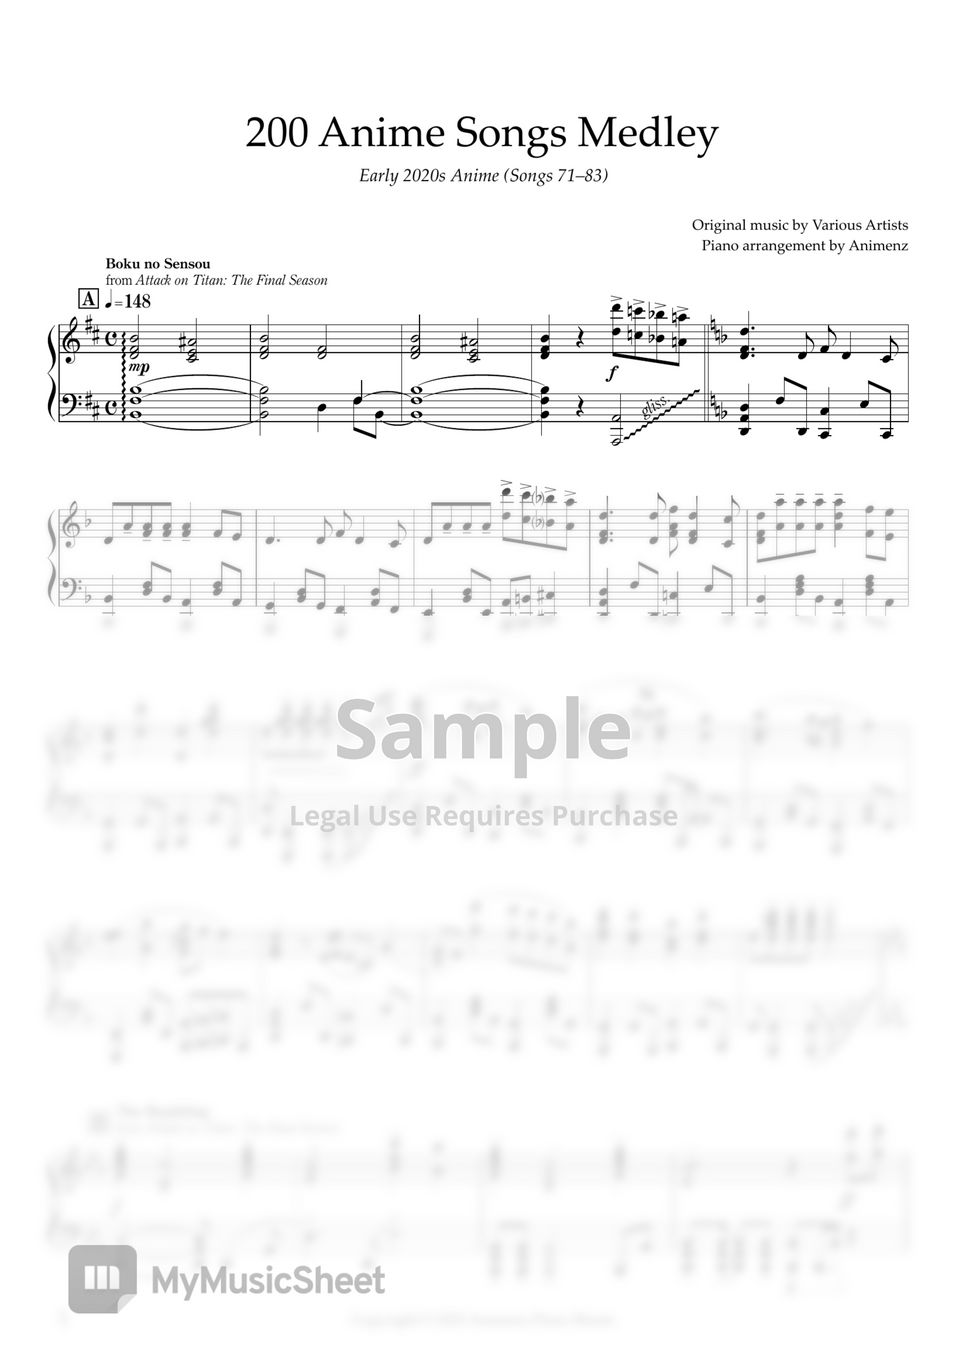 BoD-Leseprobe: Anime Piano, Compendium Two: Easy Anime Piano Sheet Music  Book for Beginners and Advanced